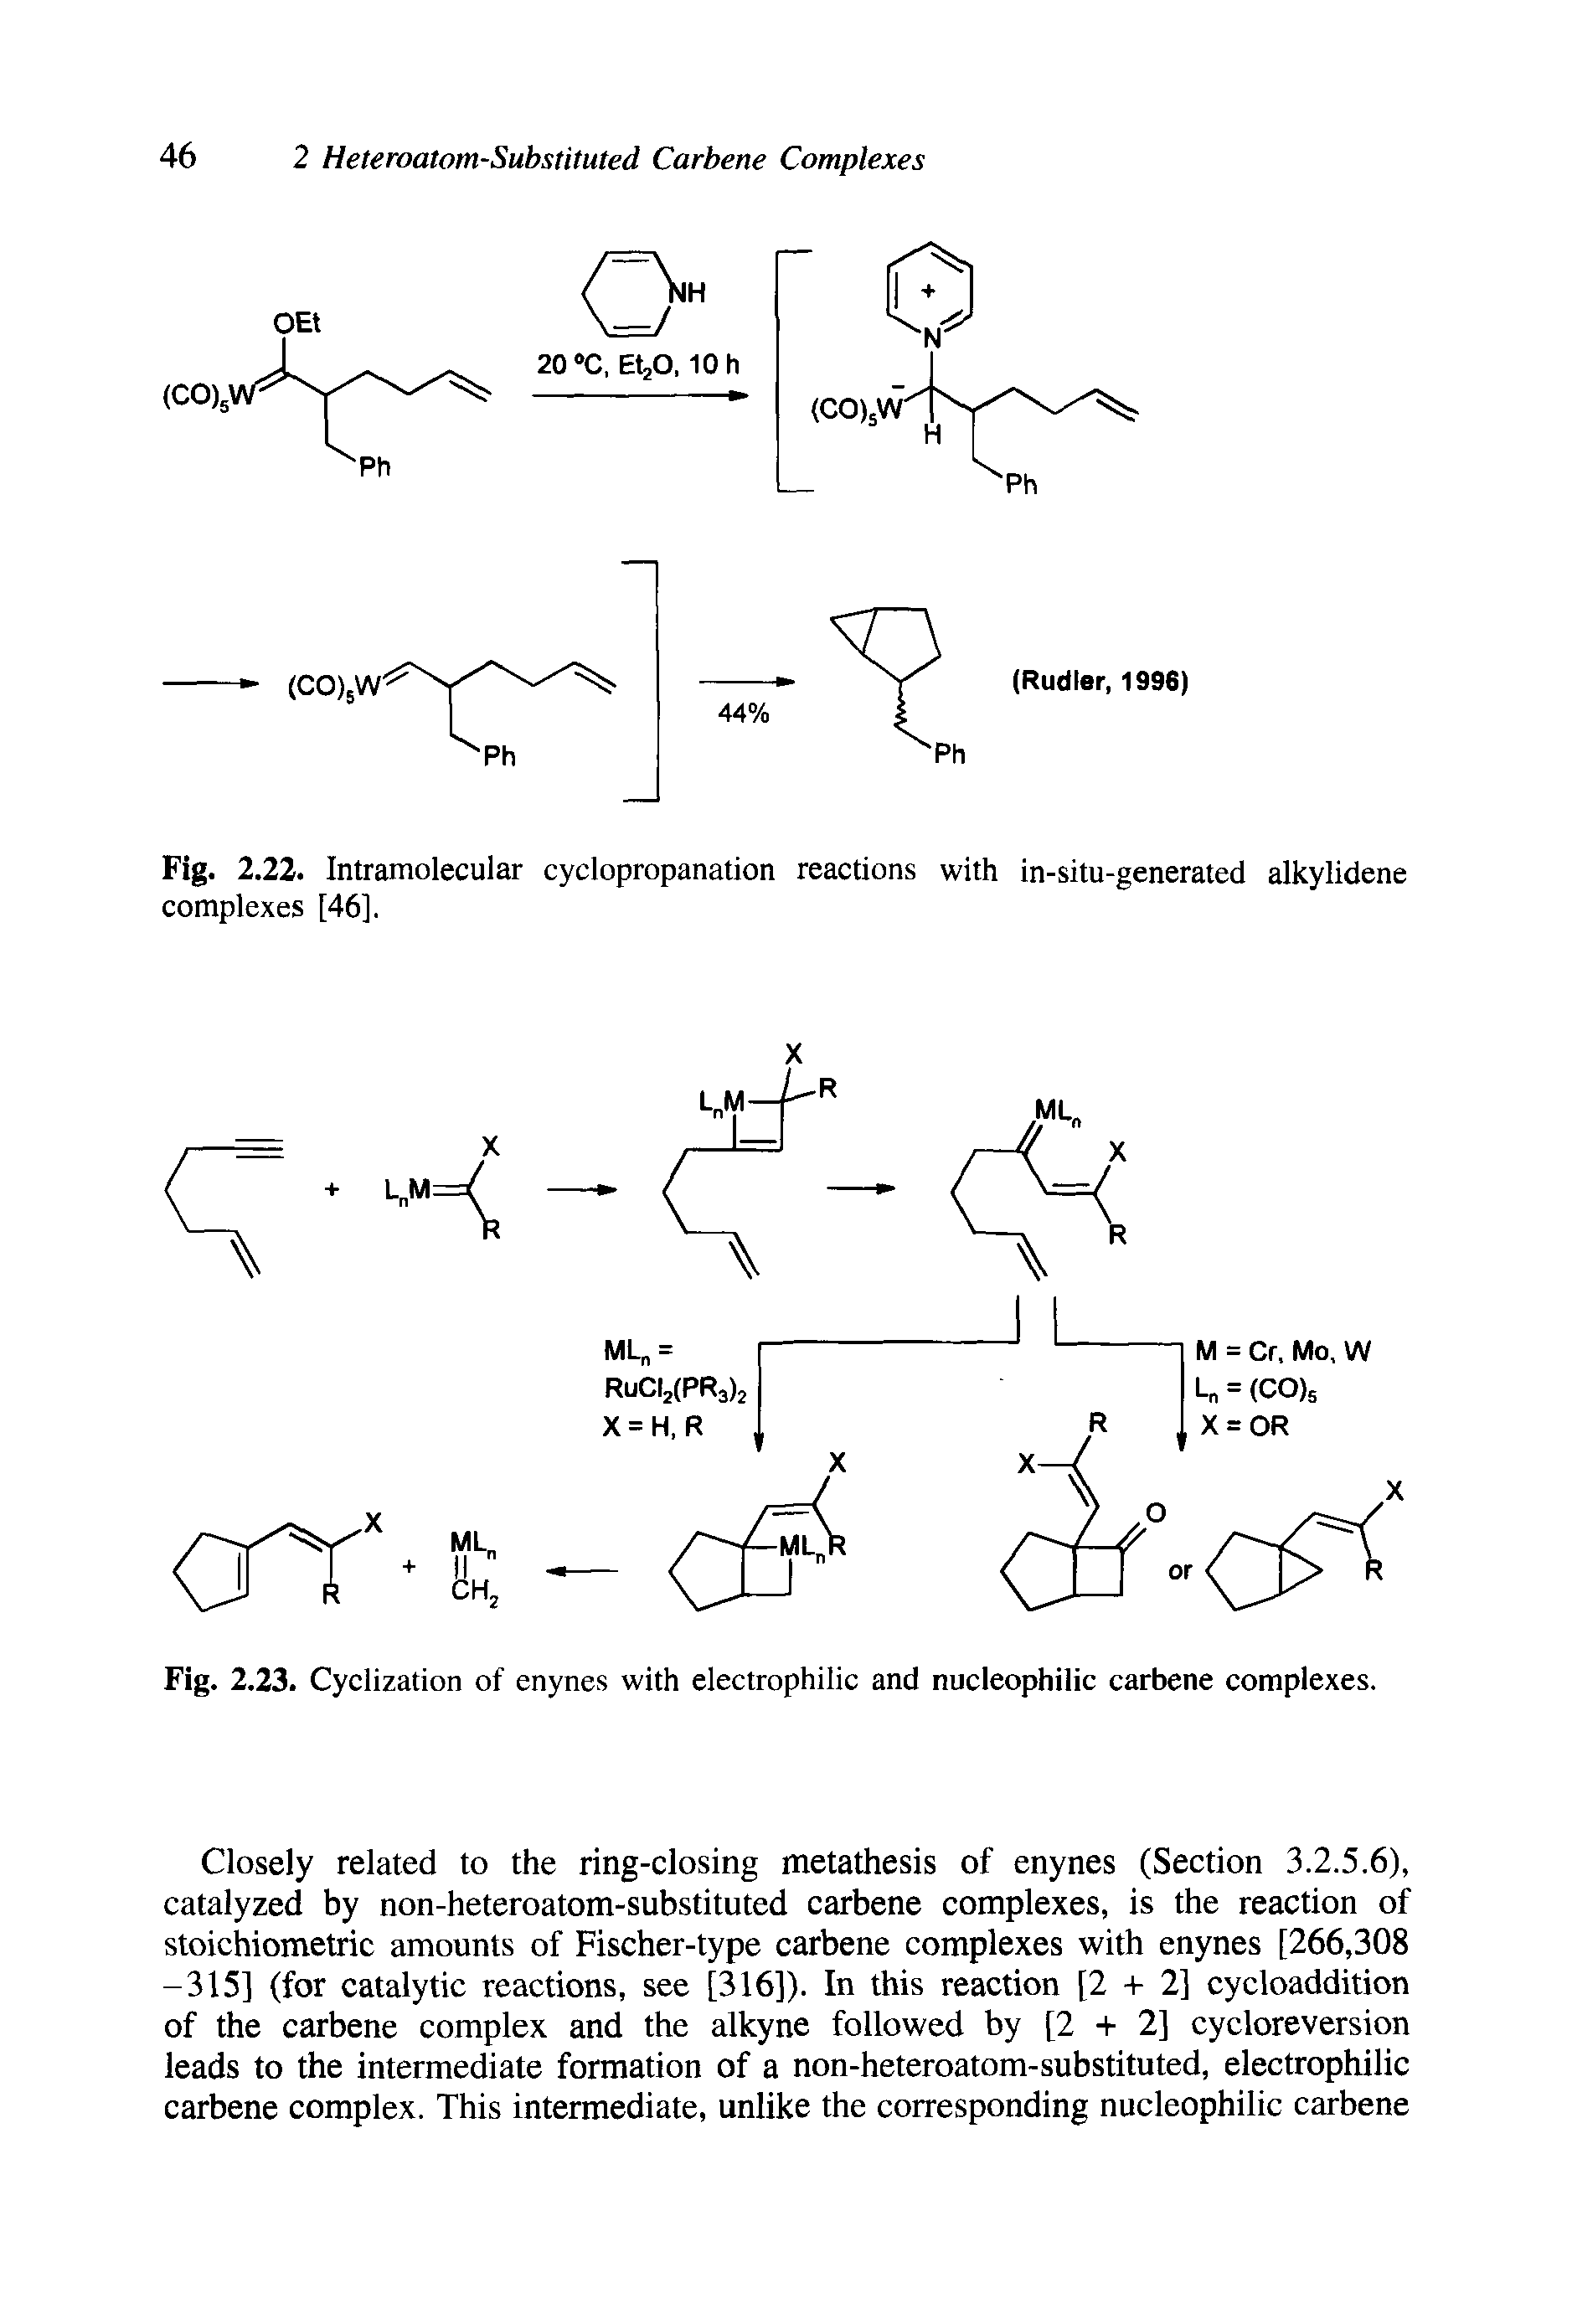 Fig. 2.23. Cyclization of enynes with electrophilic and nucleophilic carbene complexes.